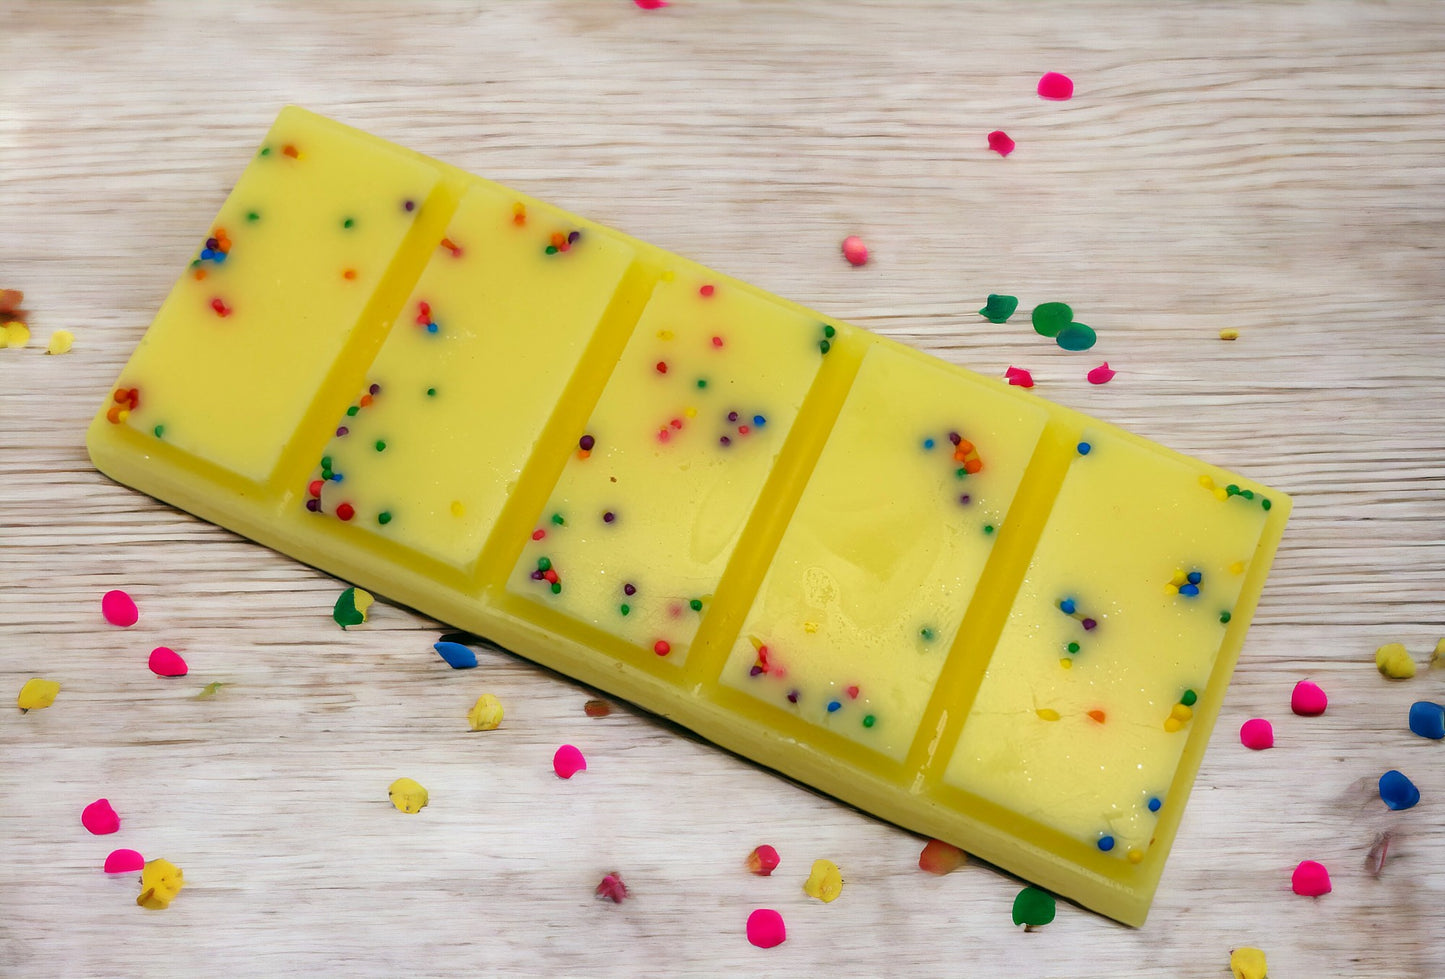 Iced Lemon Cookie Wax Melts Snap Bar. 1.75 oz. Soy Wax Melts/Strongly Scented Wax Melts. 1 Bar